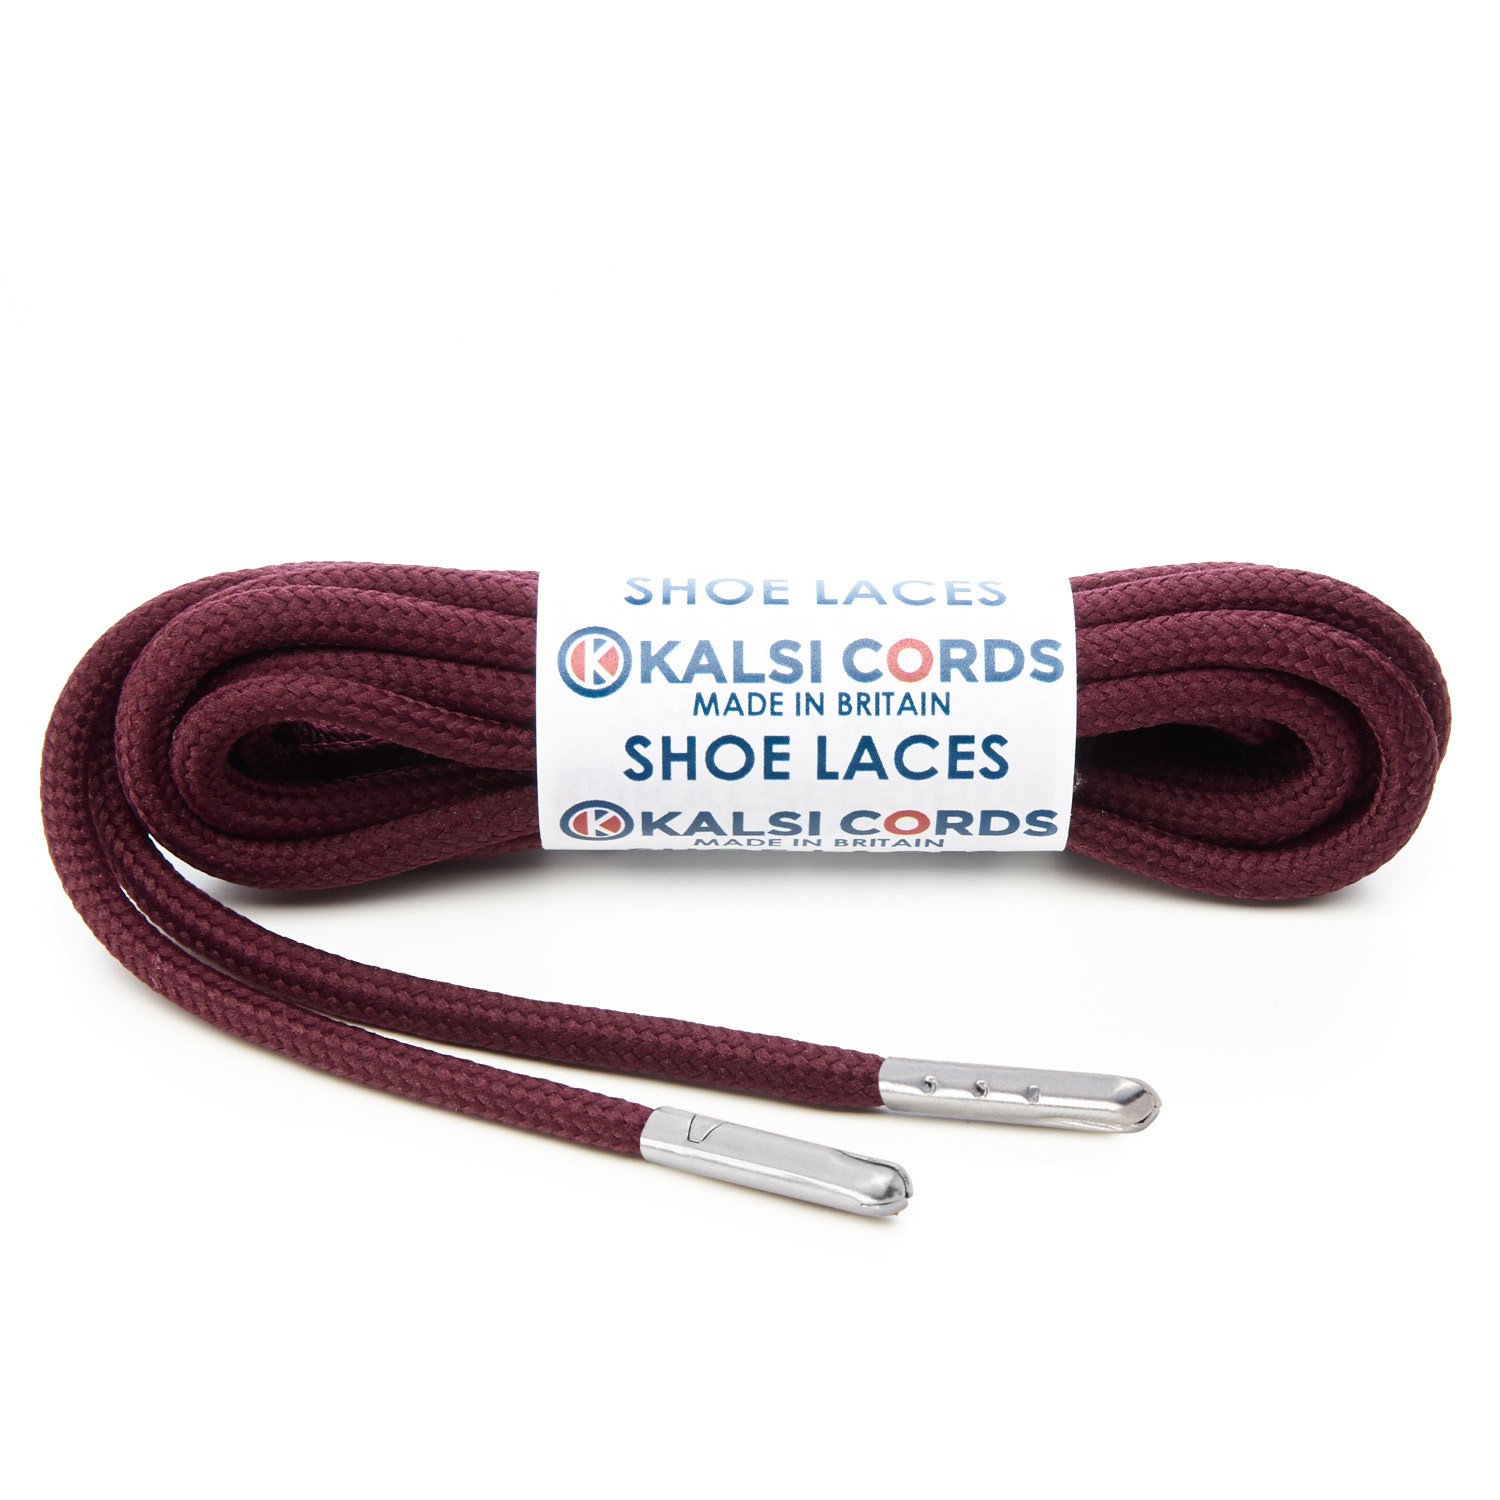 T621 5mm Round Polyester Shoe Laces Porto 1 Silver Metal Tip Kalsi Cords